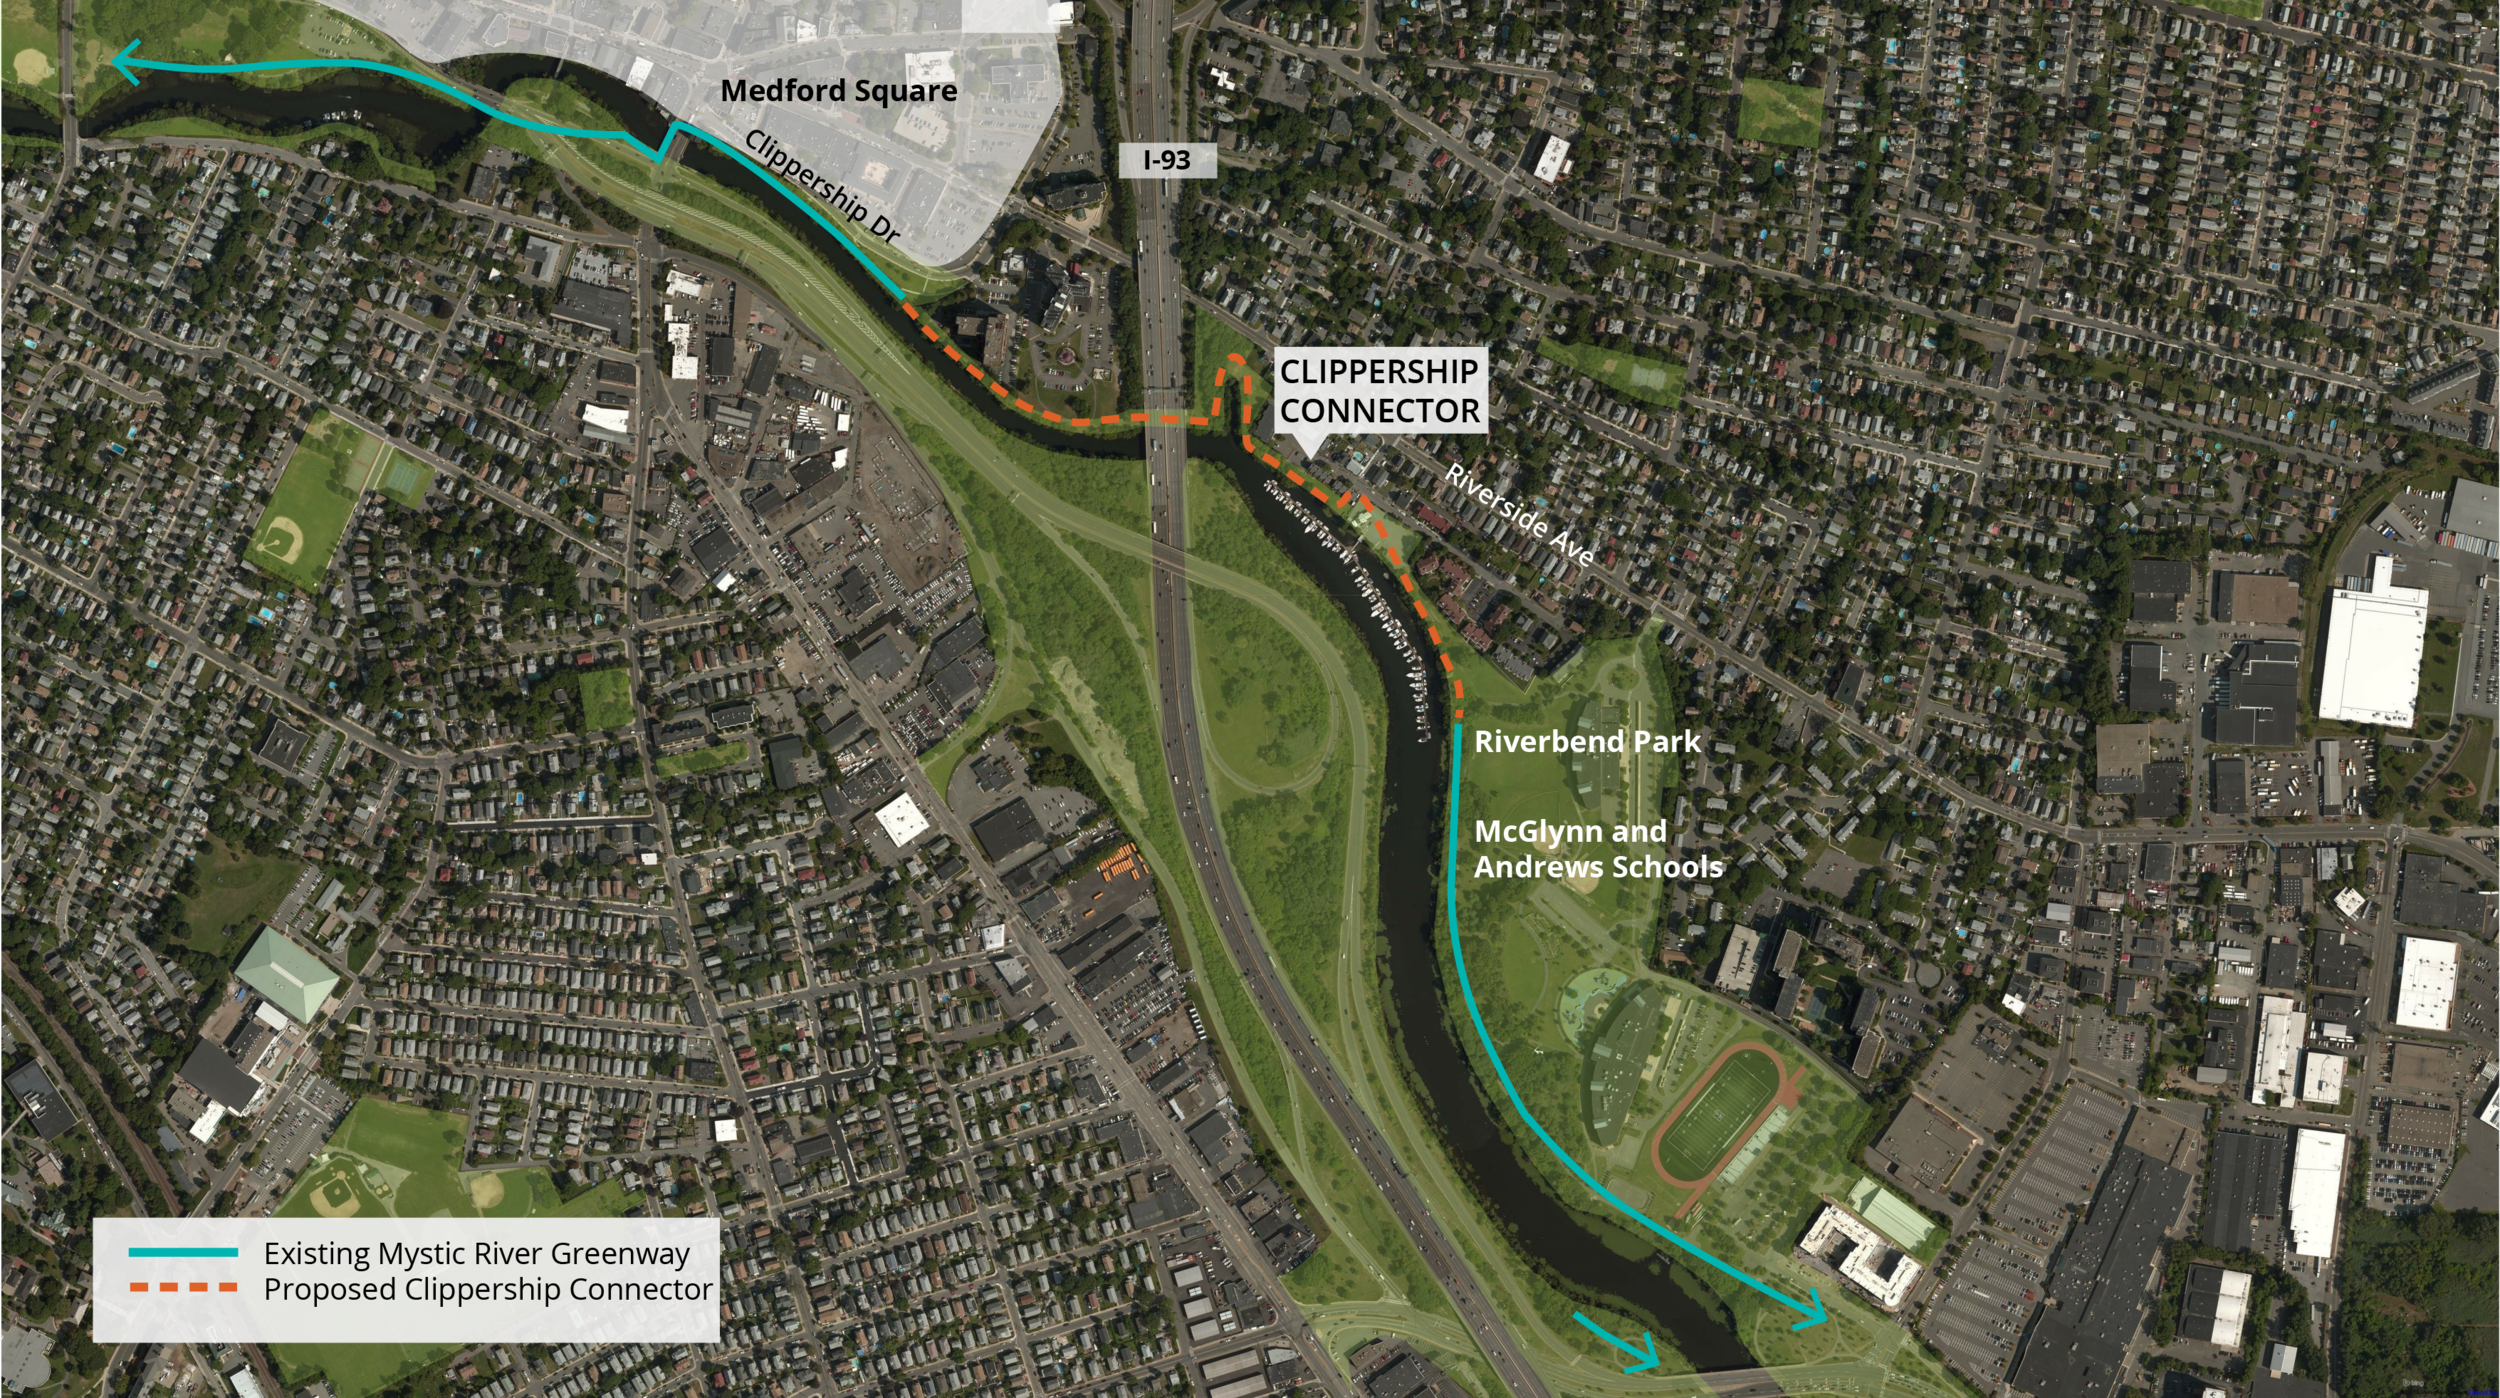 Location of the proposed Clippership Connector path along the Mystic River near Medford Square. 